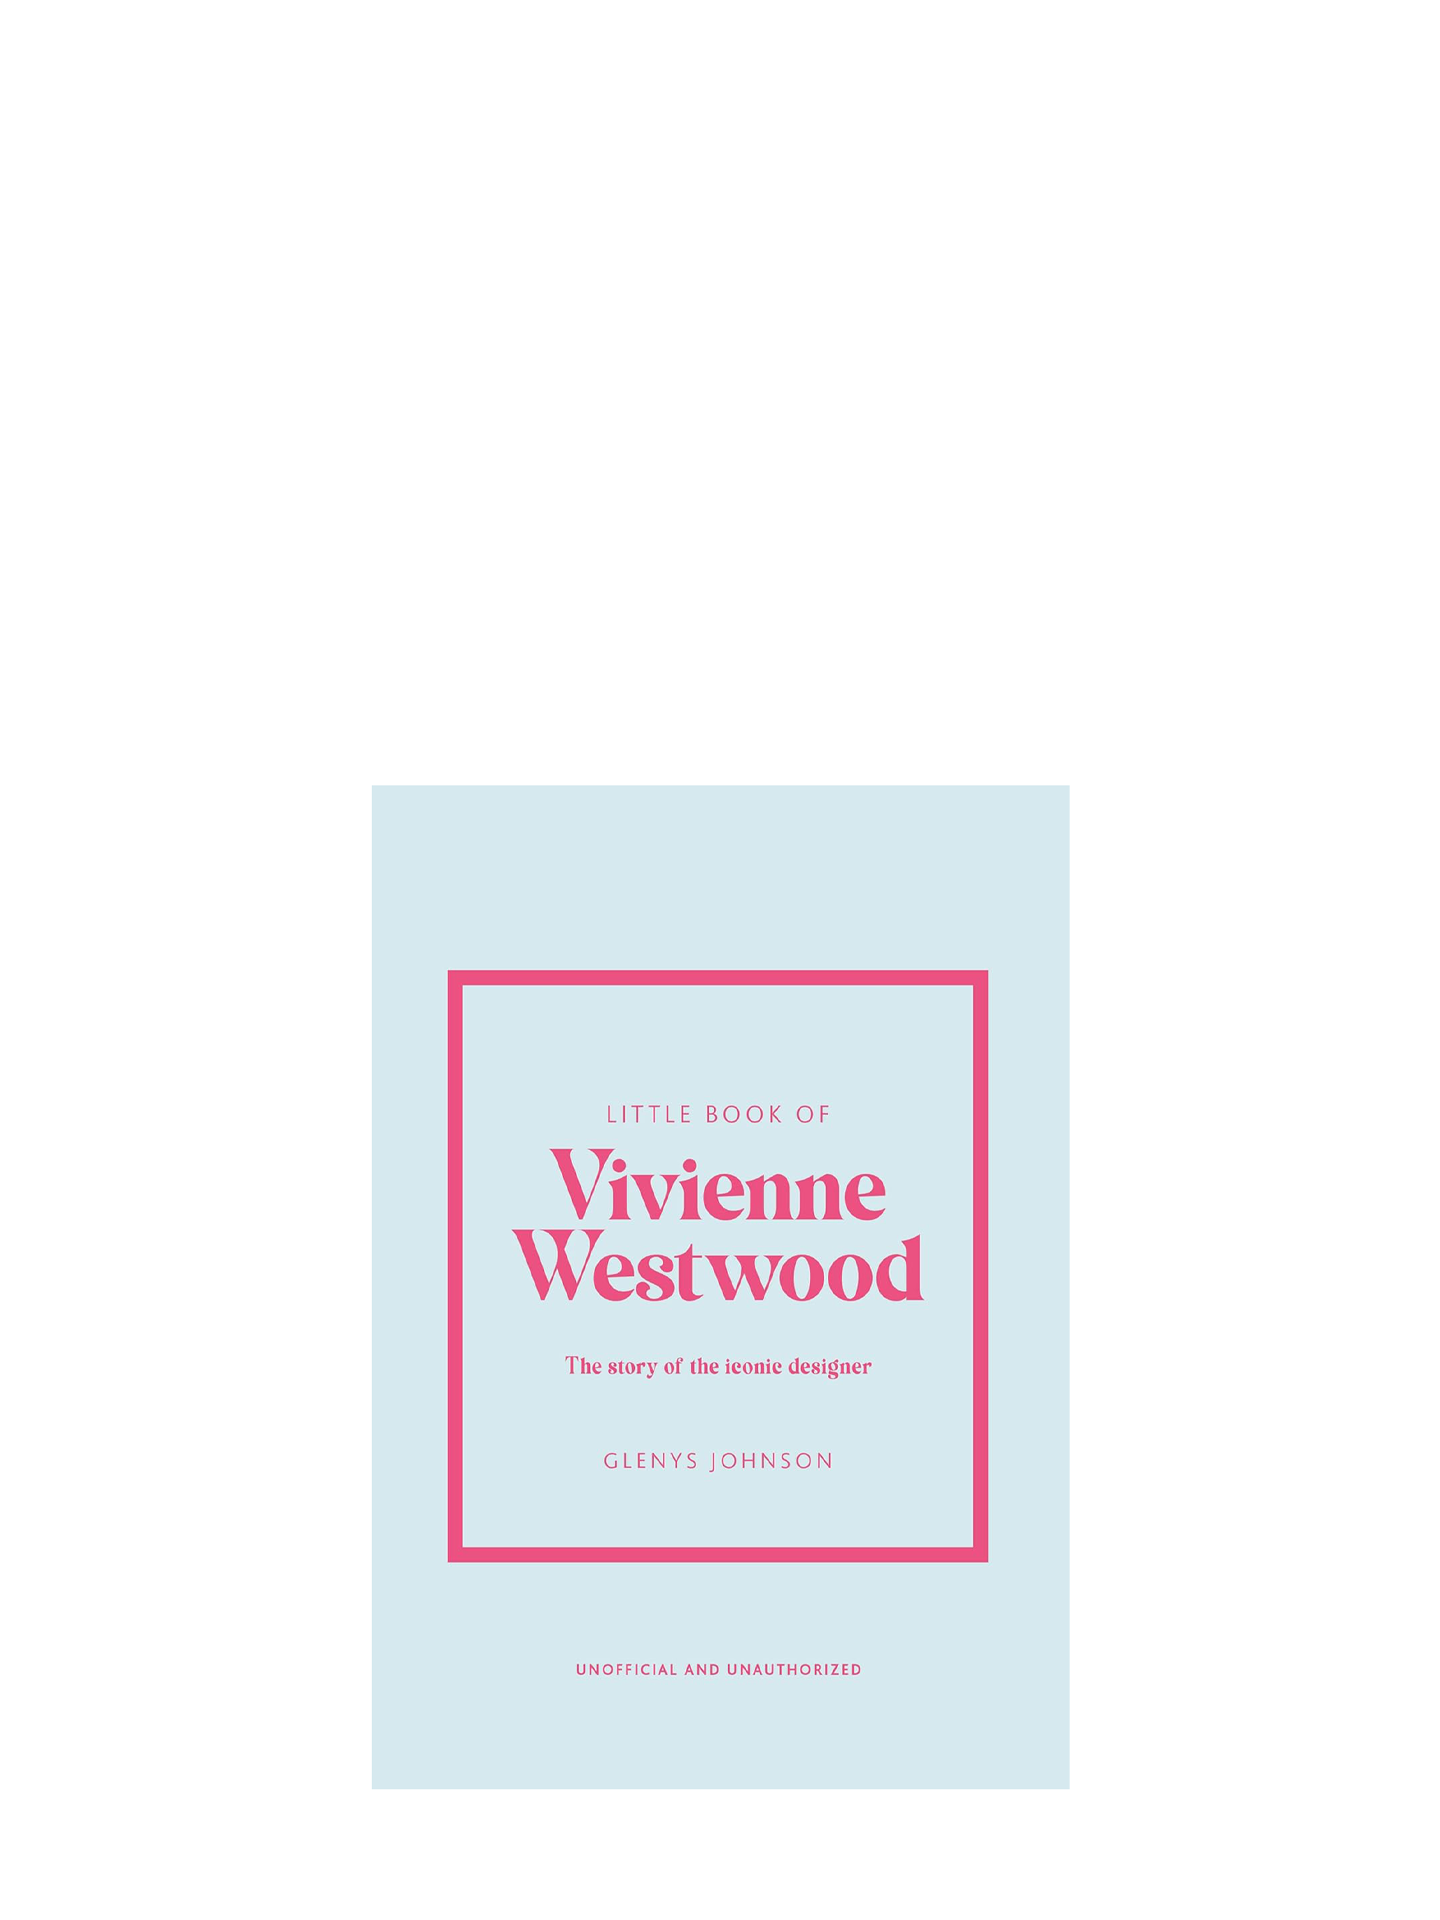 The little book of Vivienne Westwood : Glenys Johnson - 1802796452 - Livres  mode